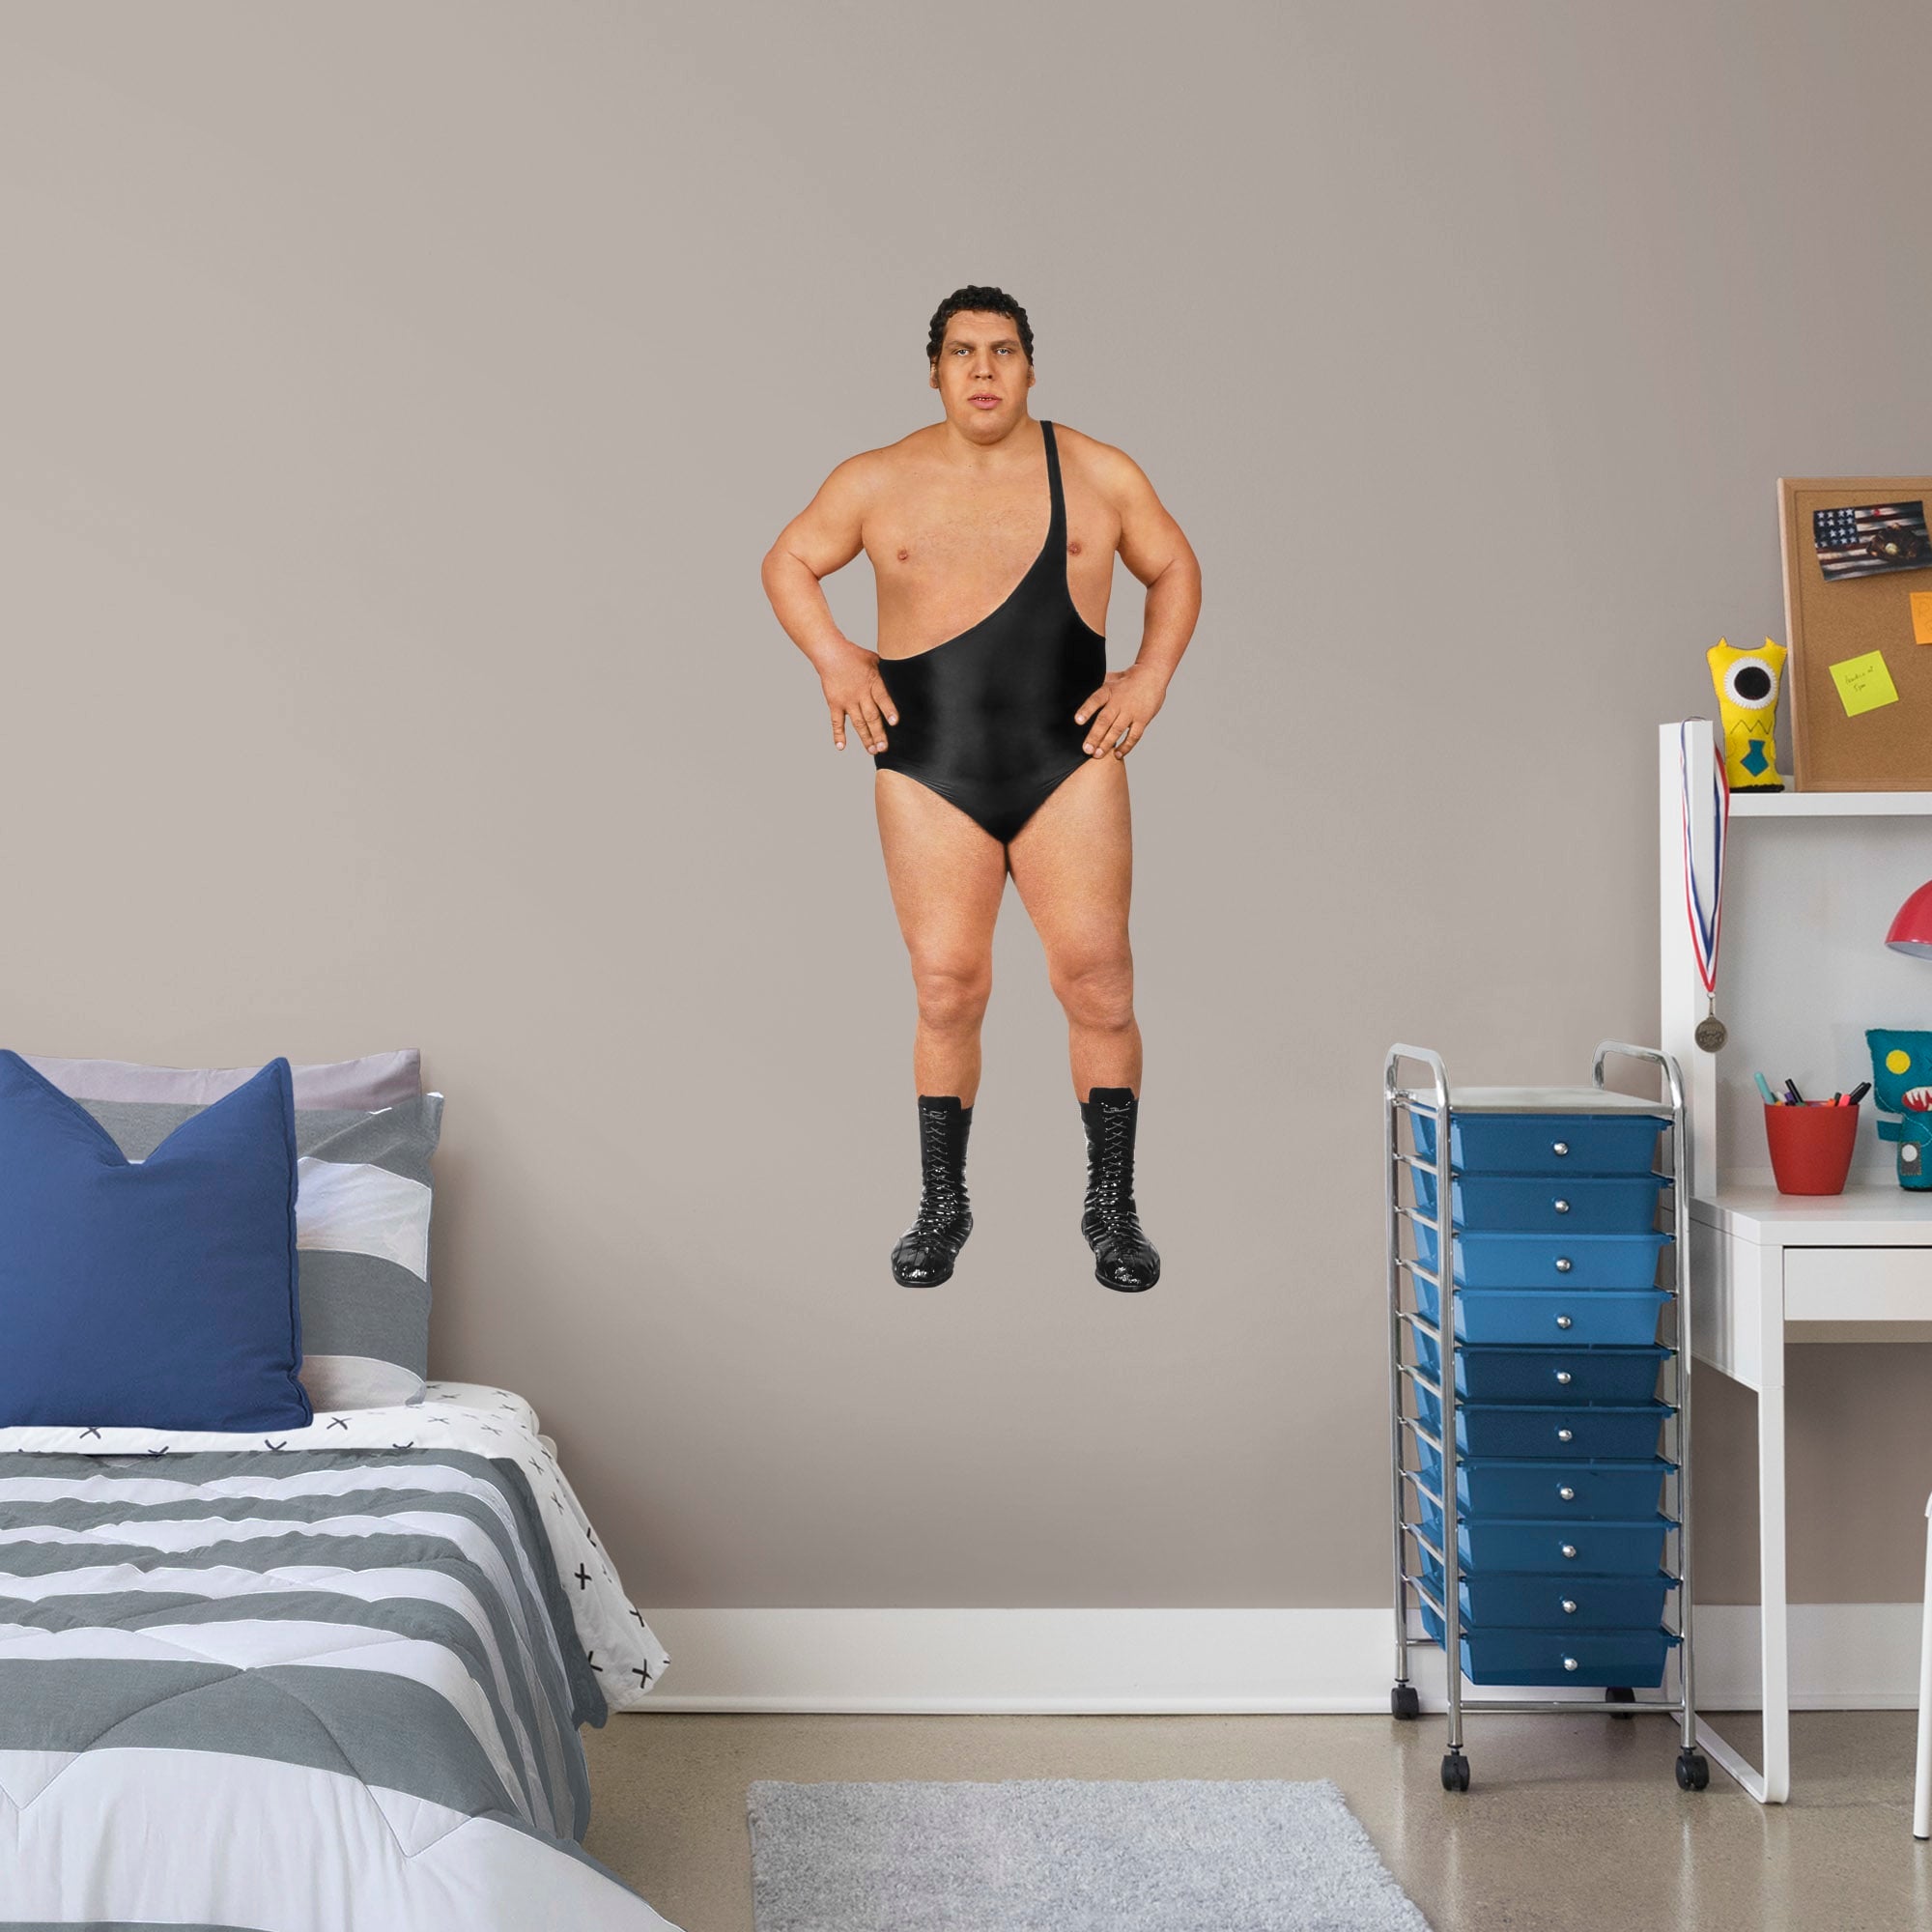 Andre The Giant for WWE - Officially Licensed Removable Wall Decal Giant Superstar + 2 Decals (23"W x 51"H) by Fathead | Vinyl